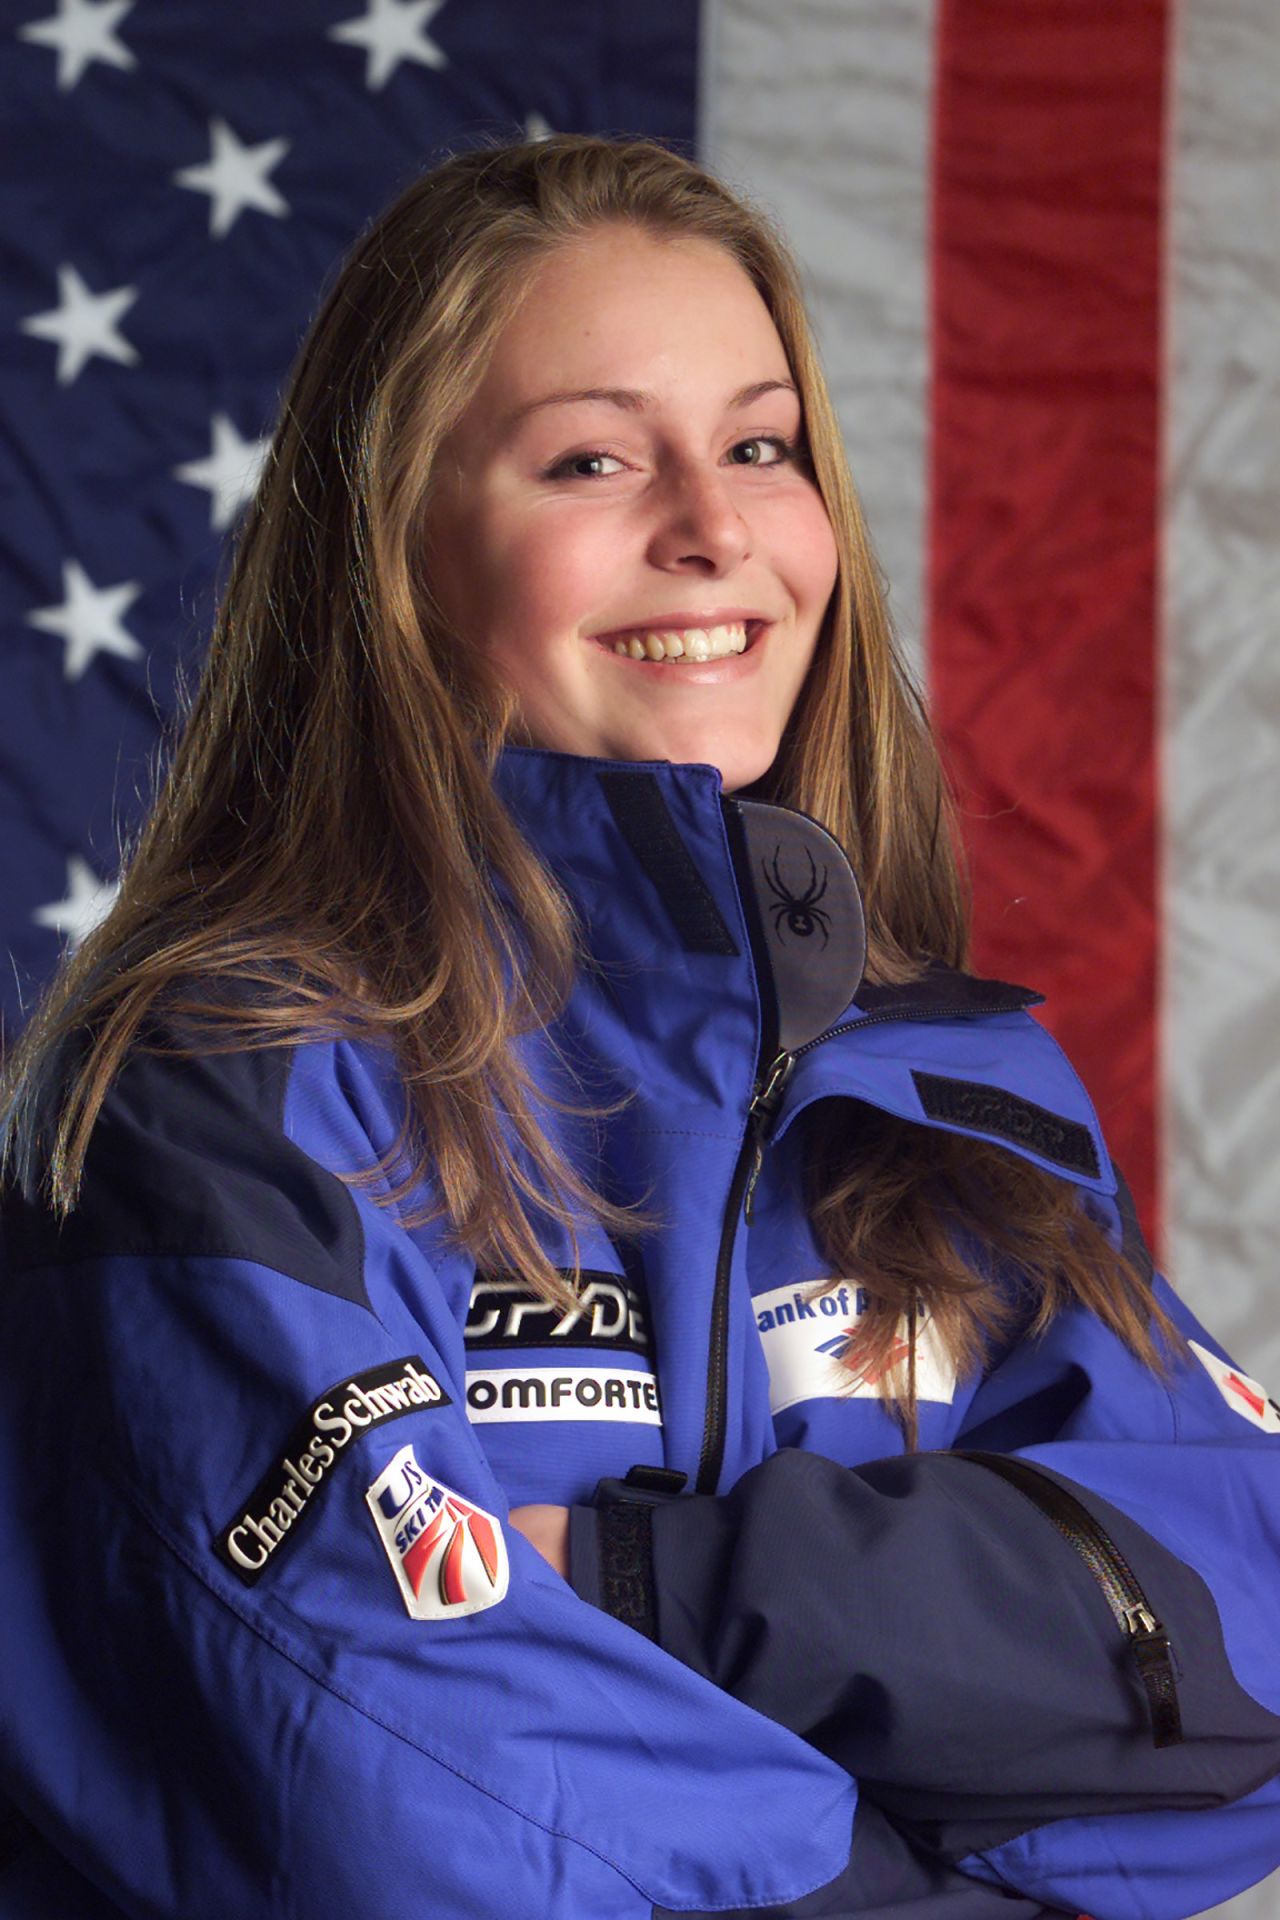 Vonn, then known as Lindsey Kildow, poses for a US Ski Team portrait in November 2001. Vonn made her World Cup debut at the age of 16, and she raced in the 2002 Winter Olympics when she was 17.